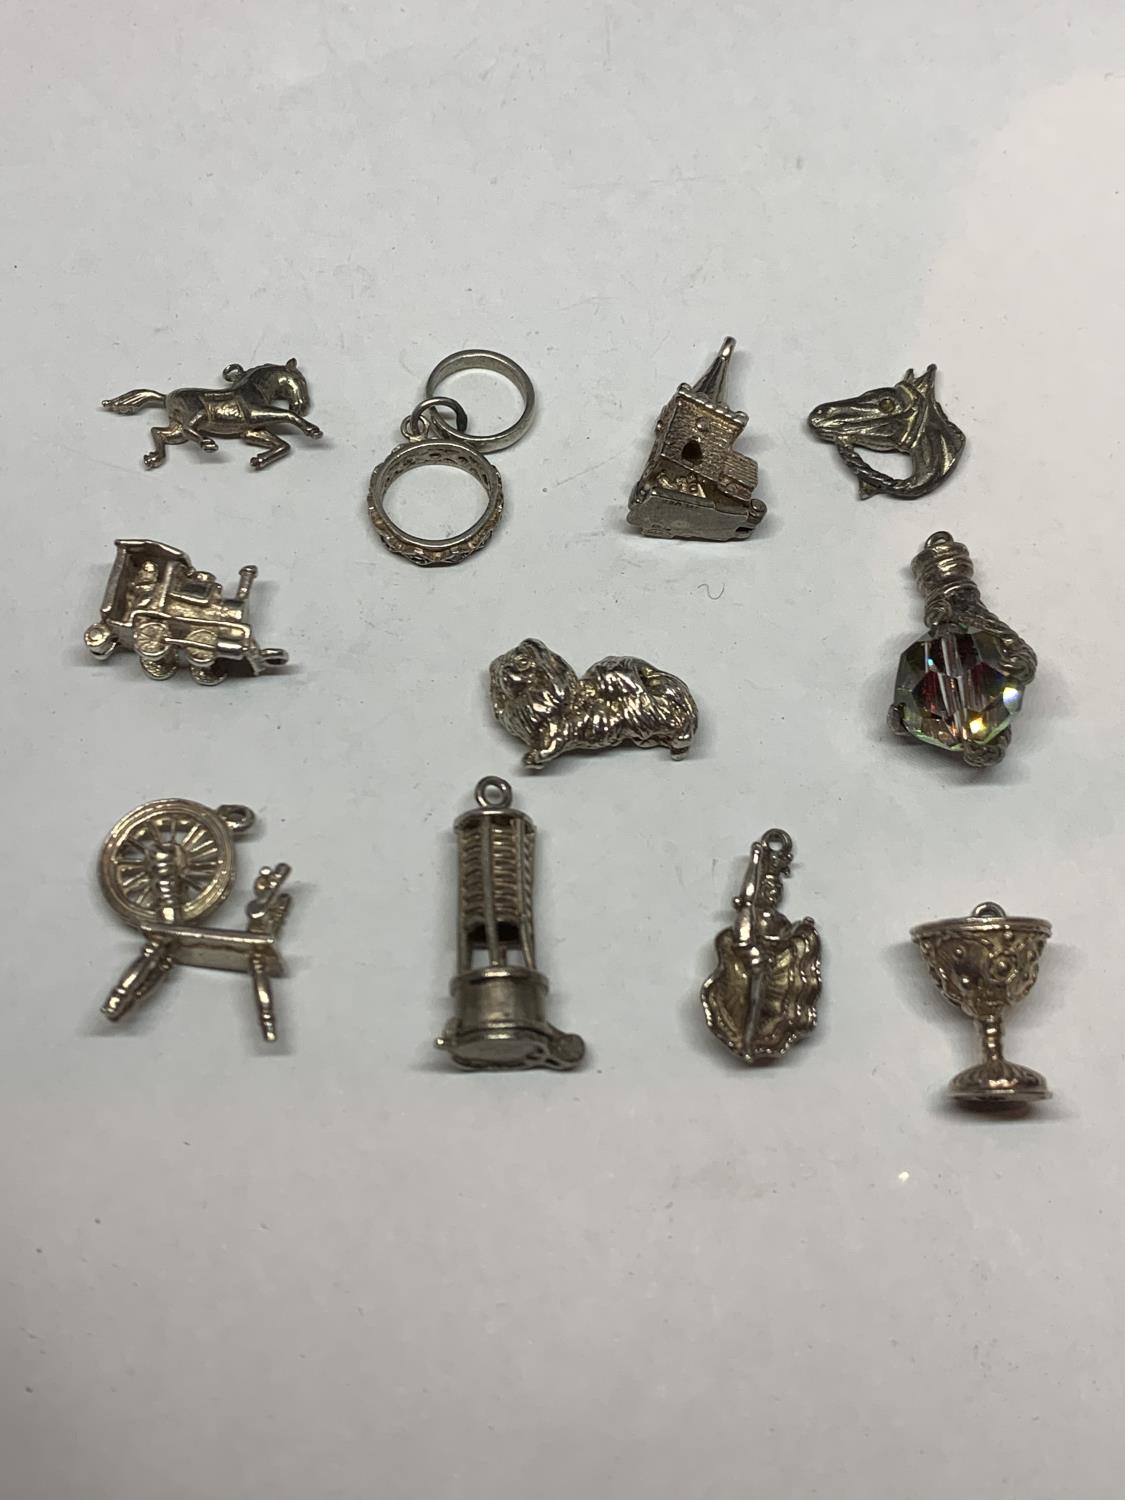 ELEVEN VARIOUS SILVER CHARMS TO INCLUDE HORSES, MOULIN ROUGE DANCER, DOG, TRAIN CHURCH ETC